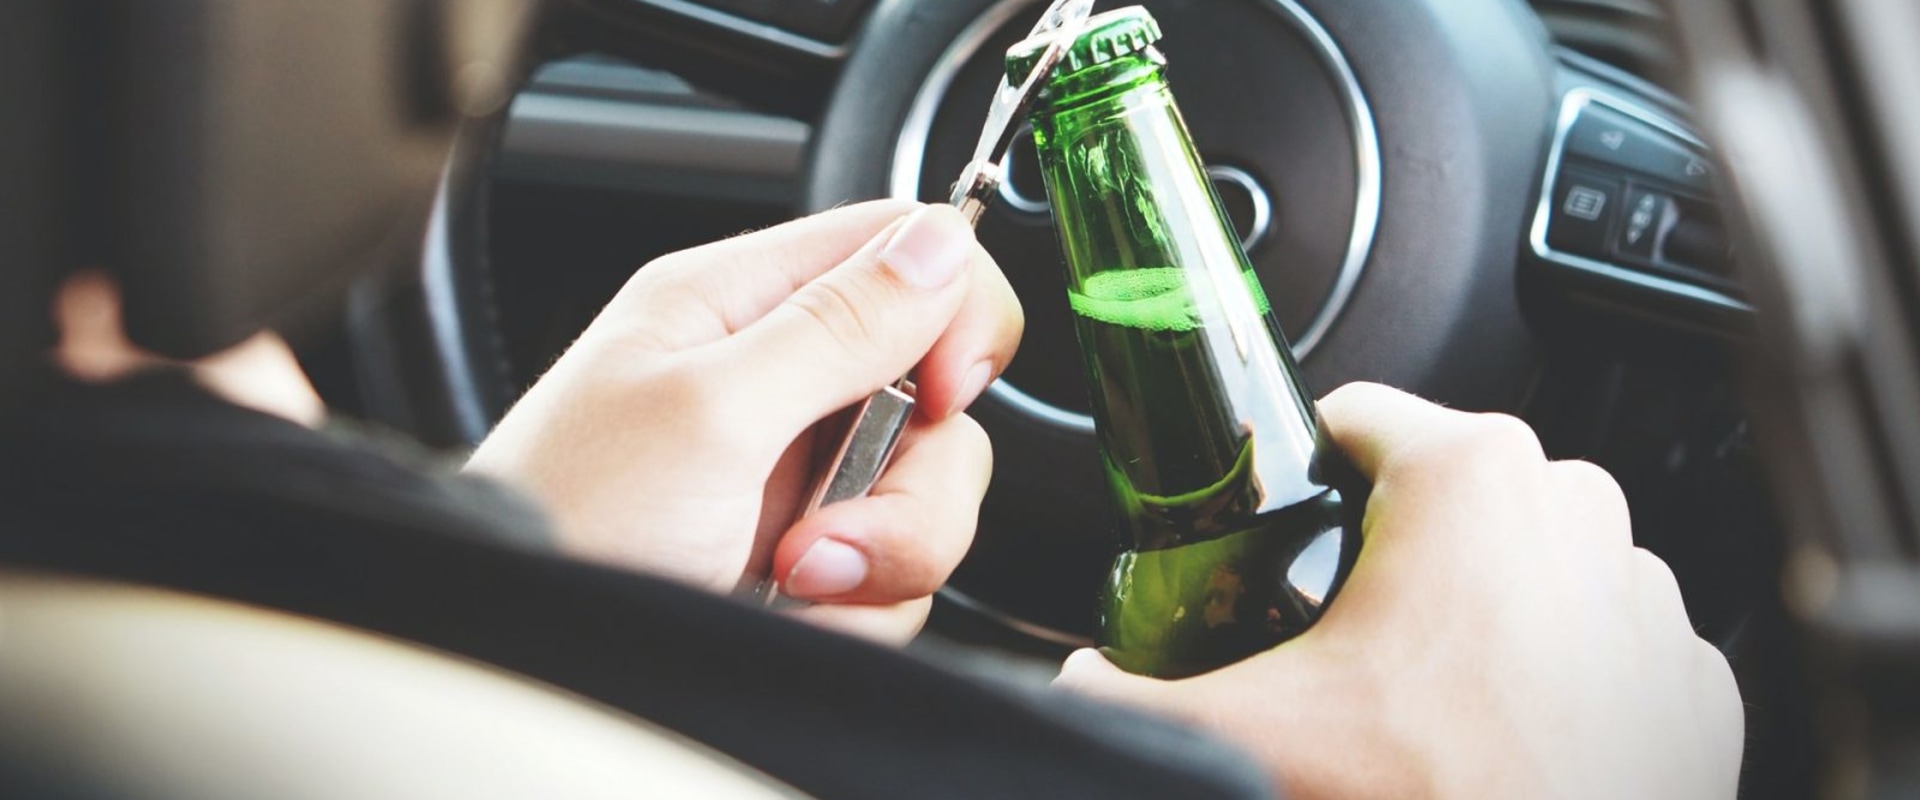 How hard is it to get a dui dismissed?